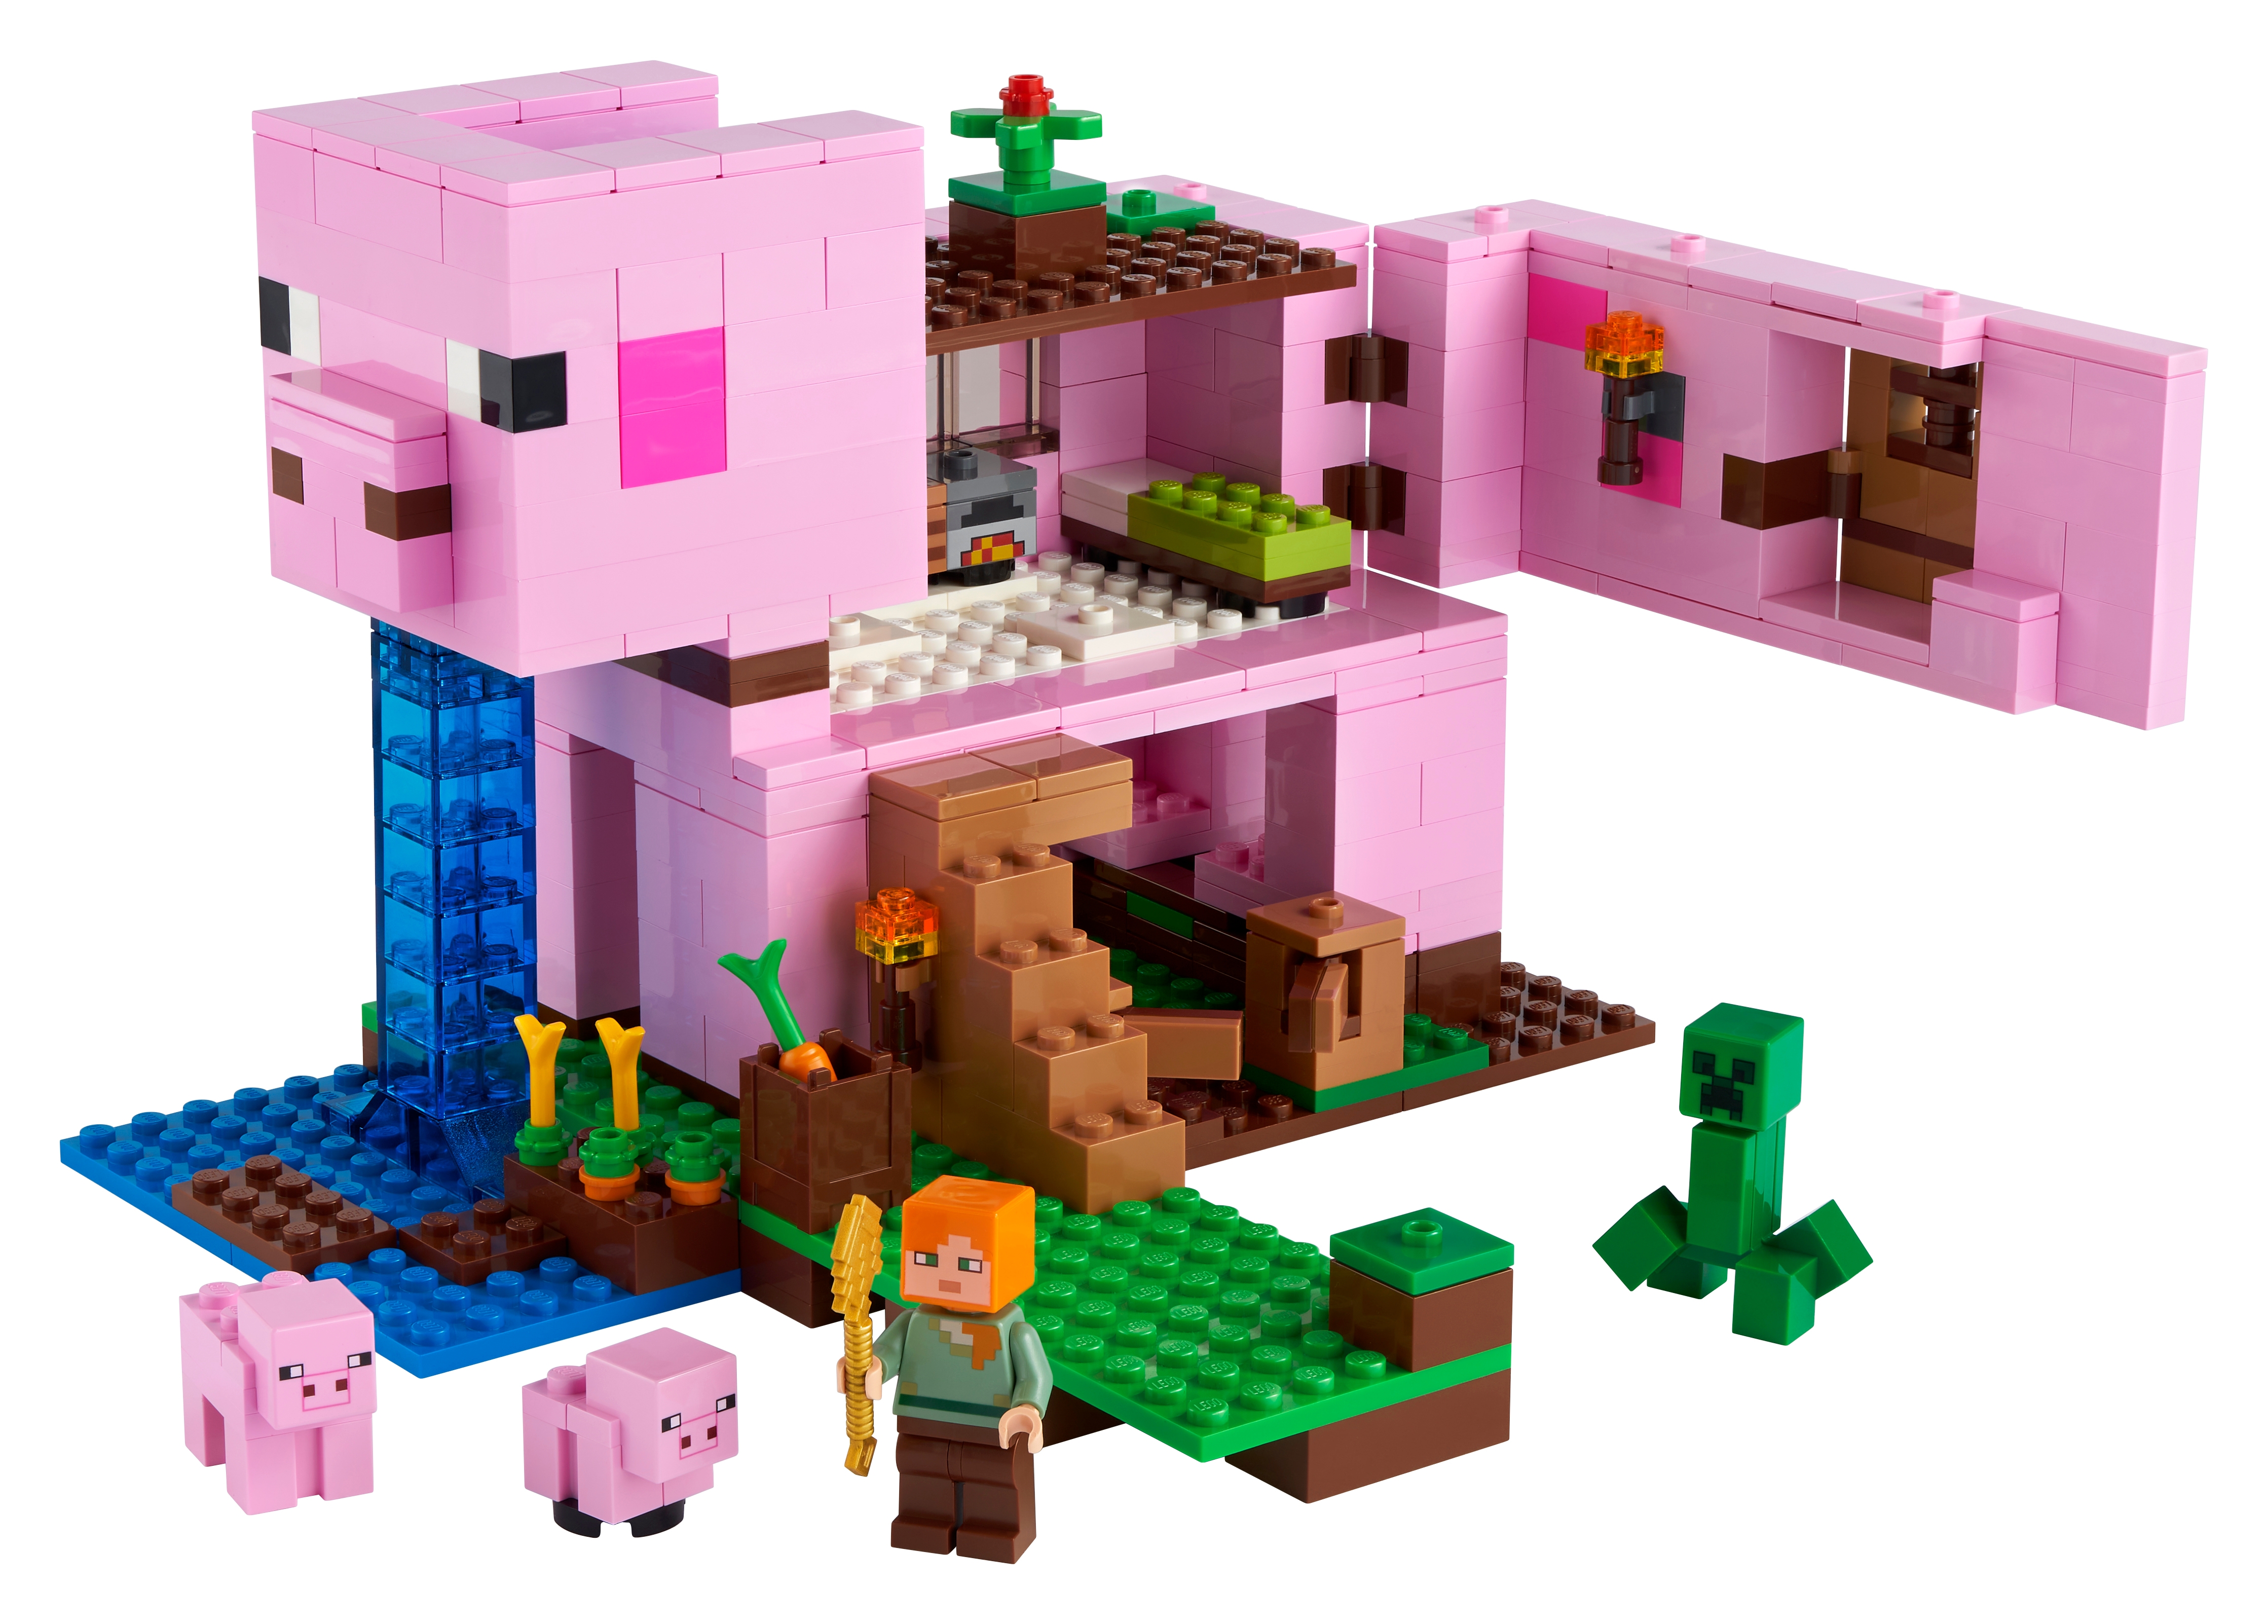 The Pig House Minecraft Buy Online At The Official Lego Shop Us